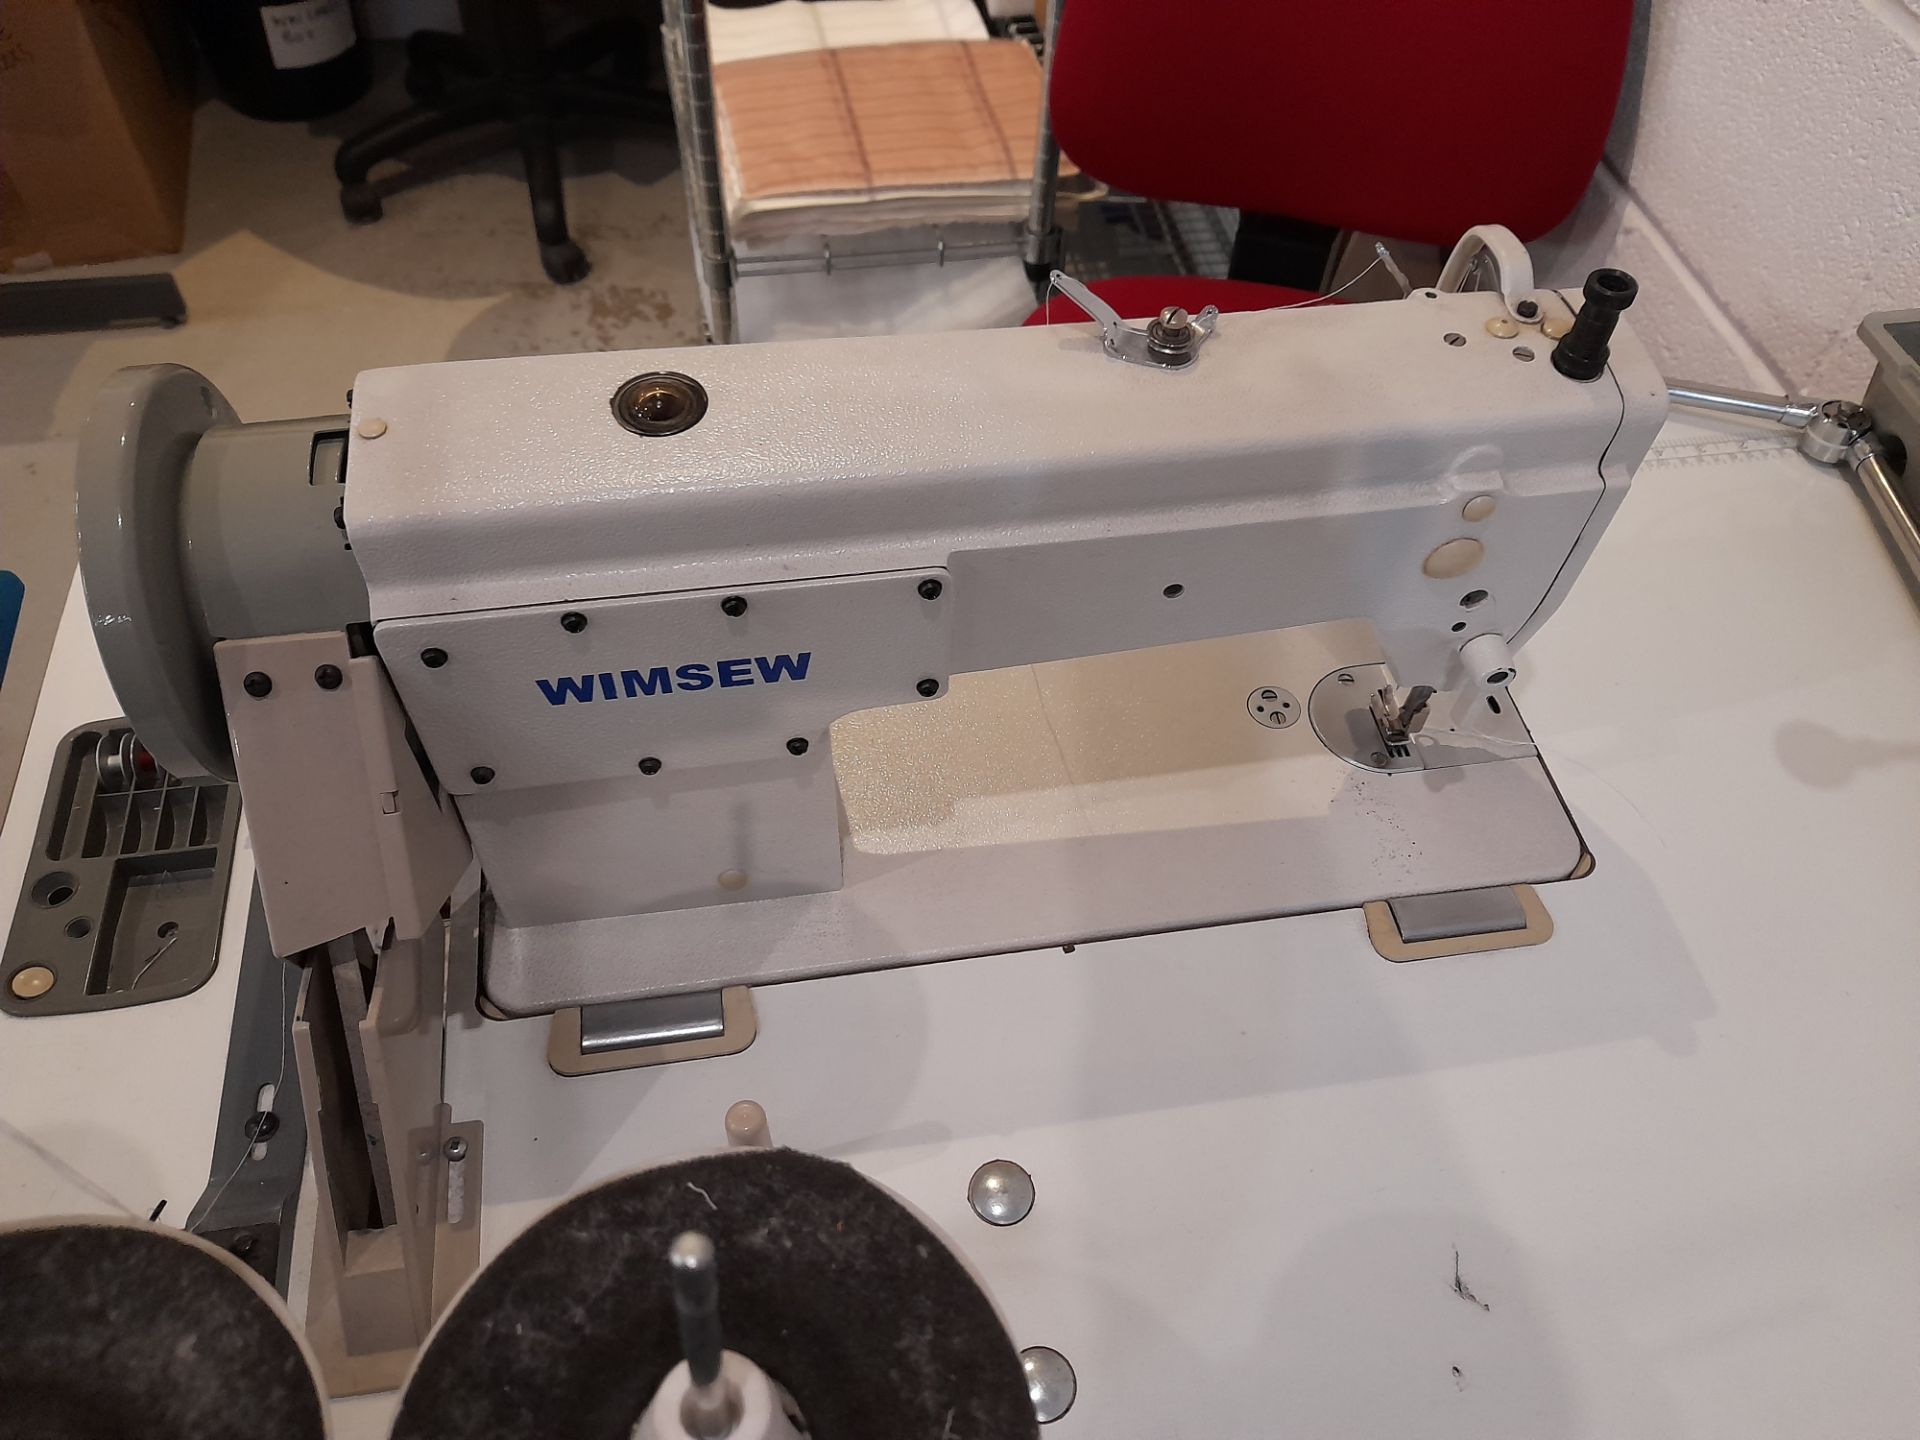 Wimsew W-111-LC single phase lockstitcher, with Industrial Sewing Machine power saving motor, - Image 7 of 7